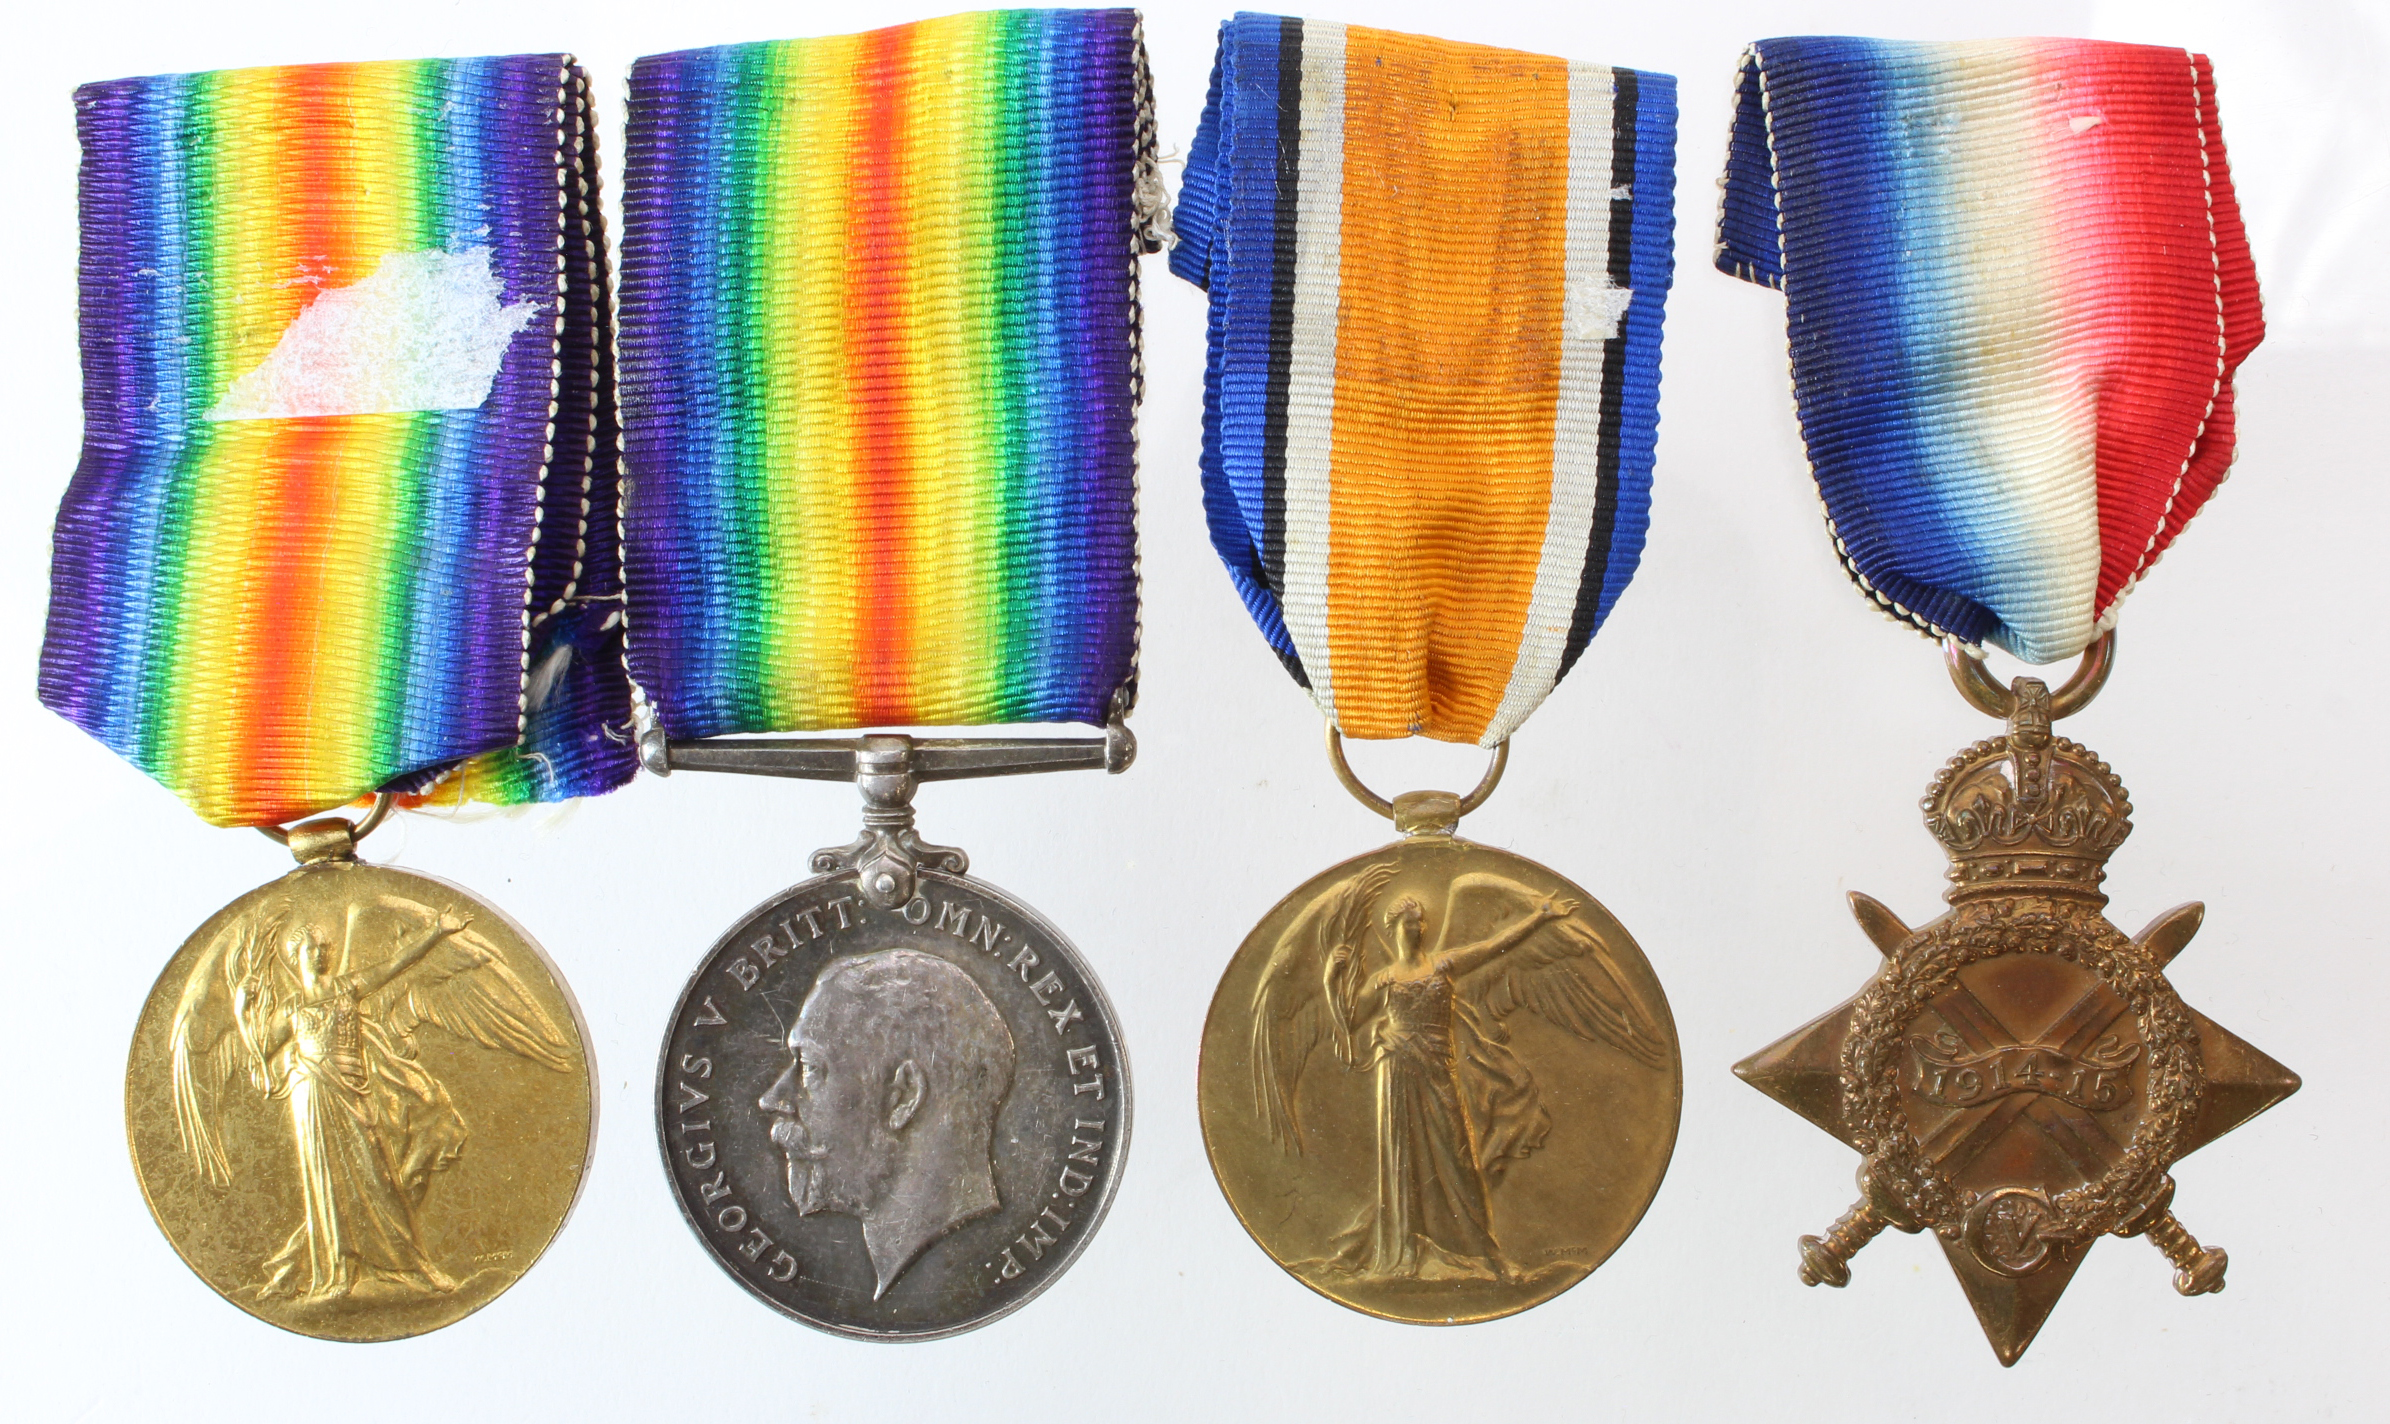 1915 Star Trio to 1983 Pte E Ede The Queens R. With a Victory Medal to L-6988 Pte W Ede The Queens